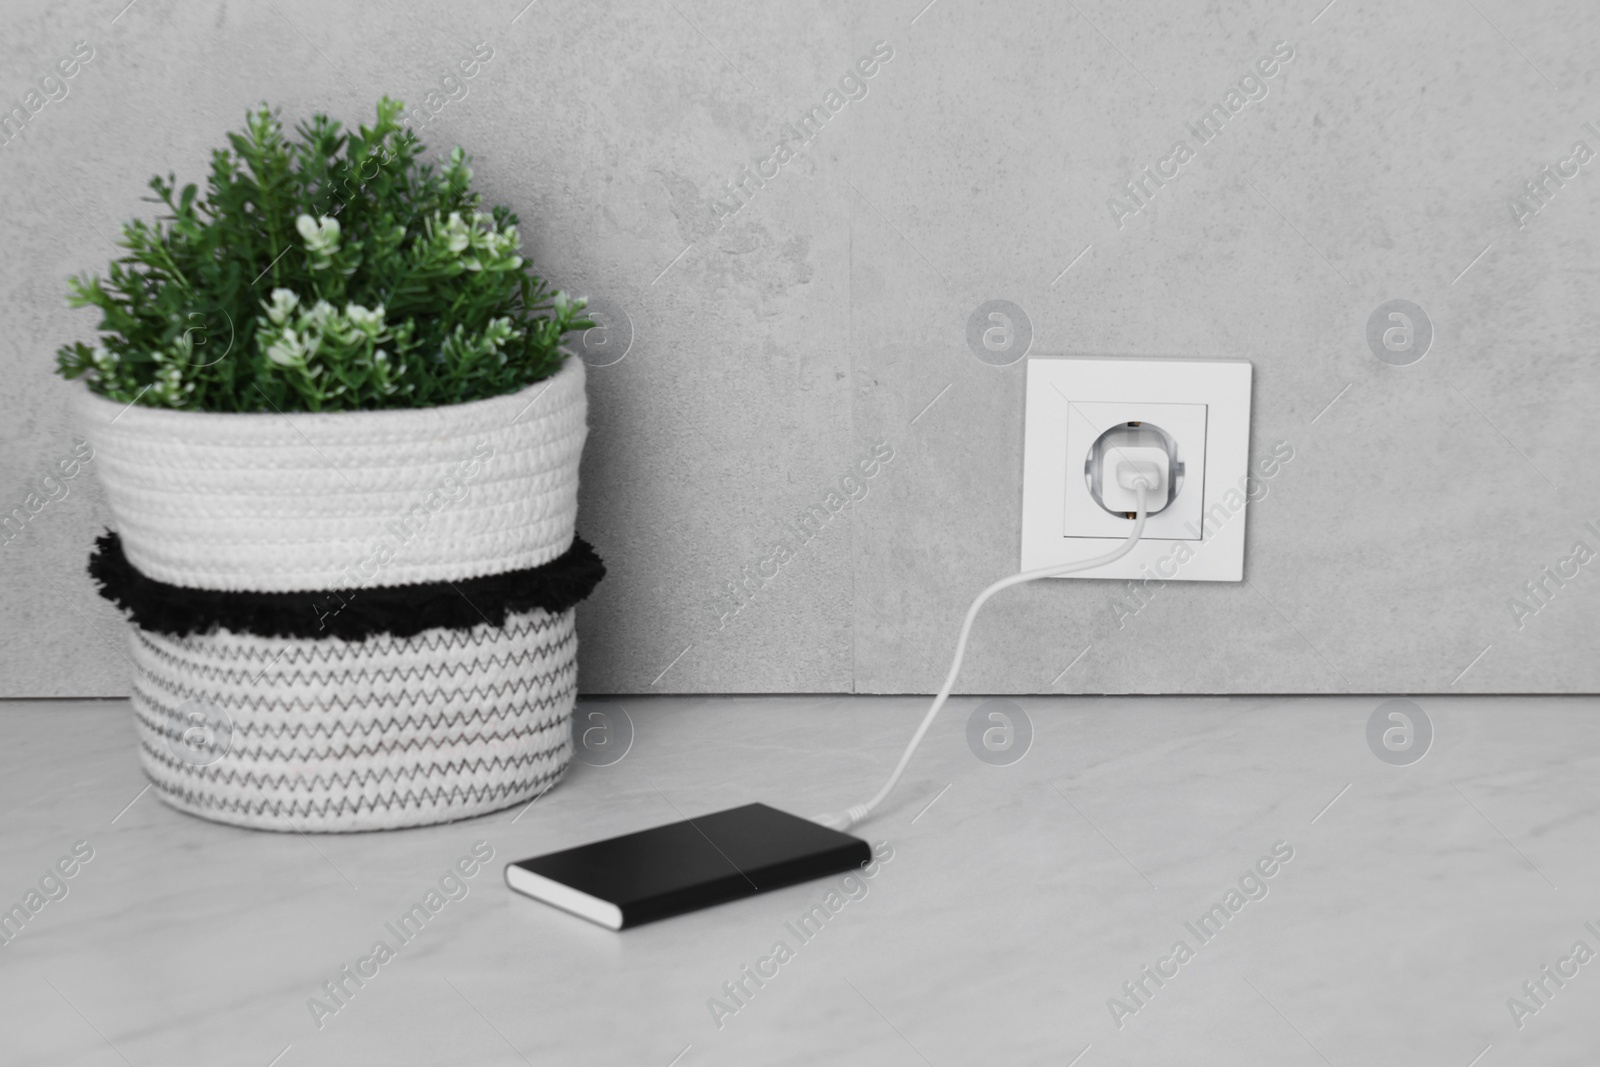 Photo of Power bank plugged into electric socket on white table